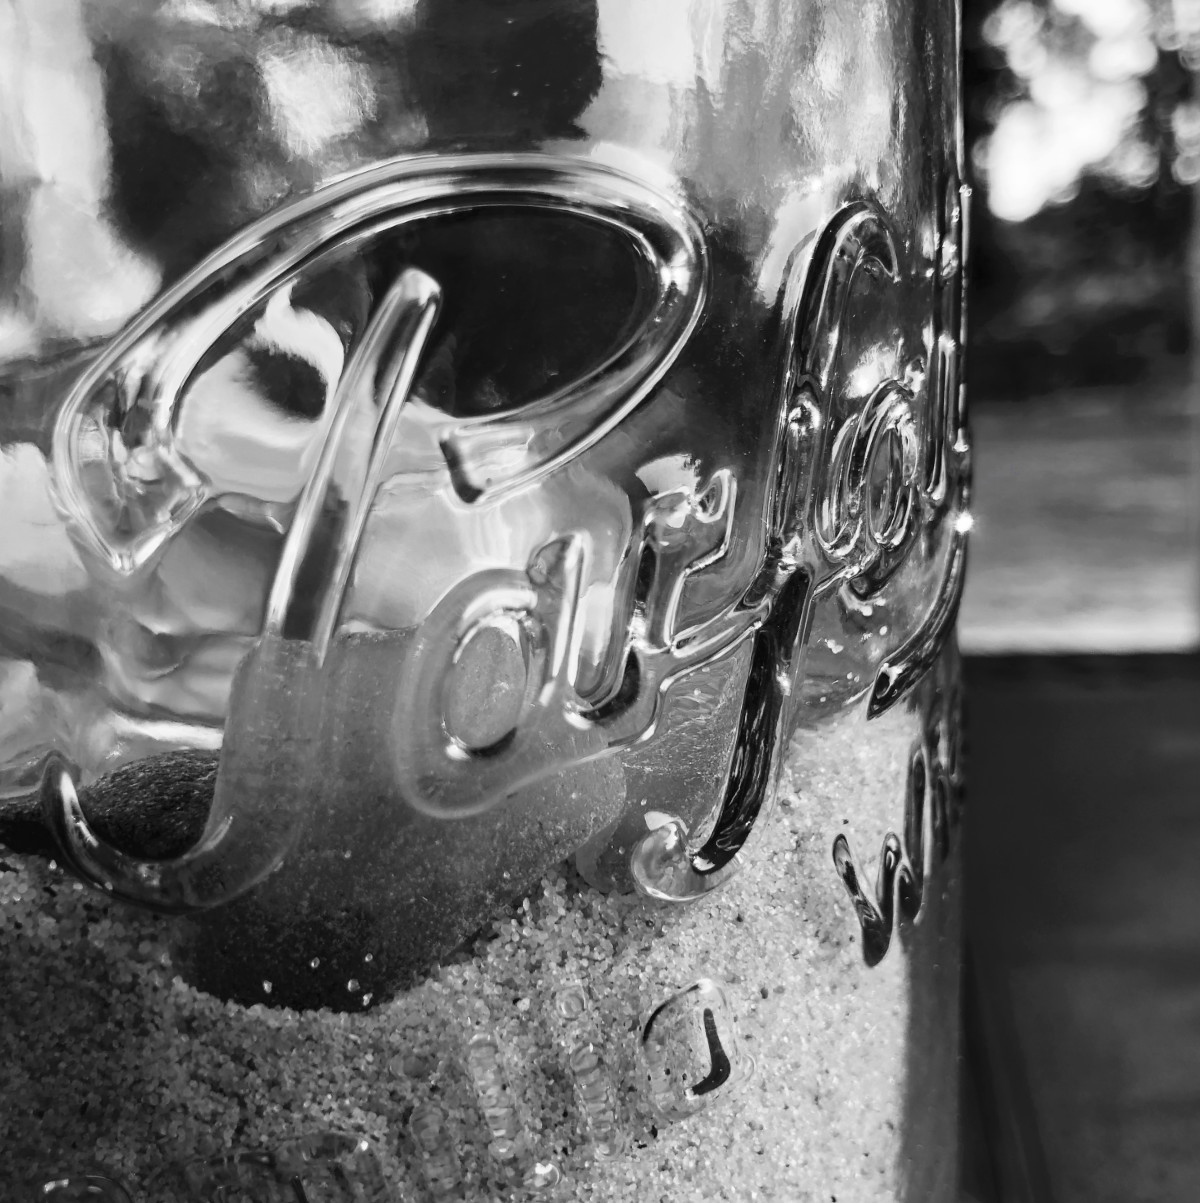 A close-up of the curved lettering and wavy glass of a traditional French preserving jar.